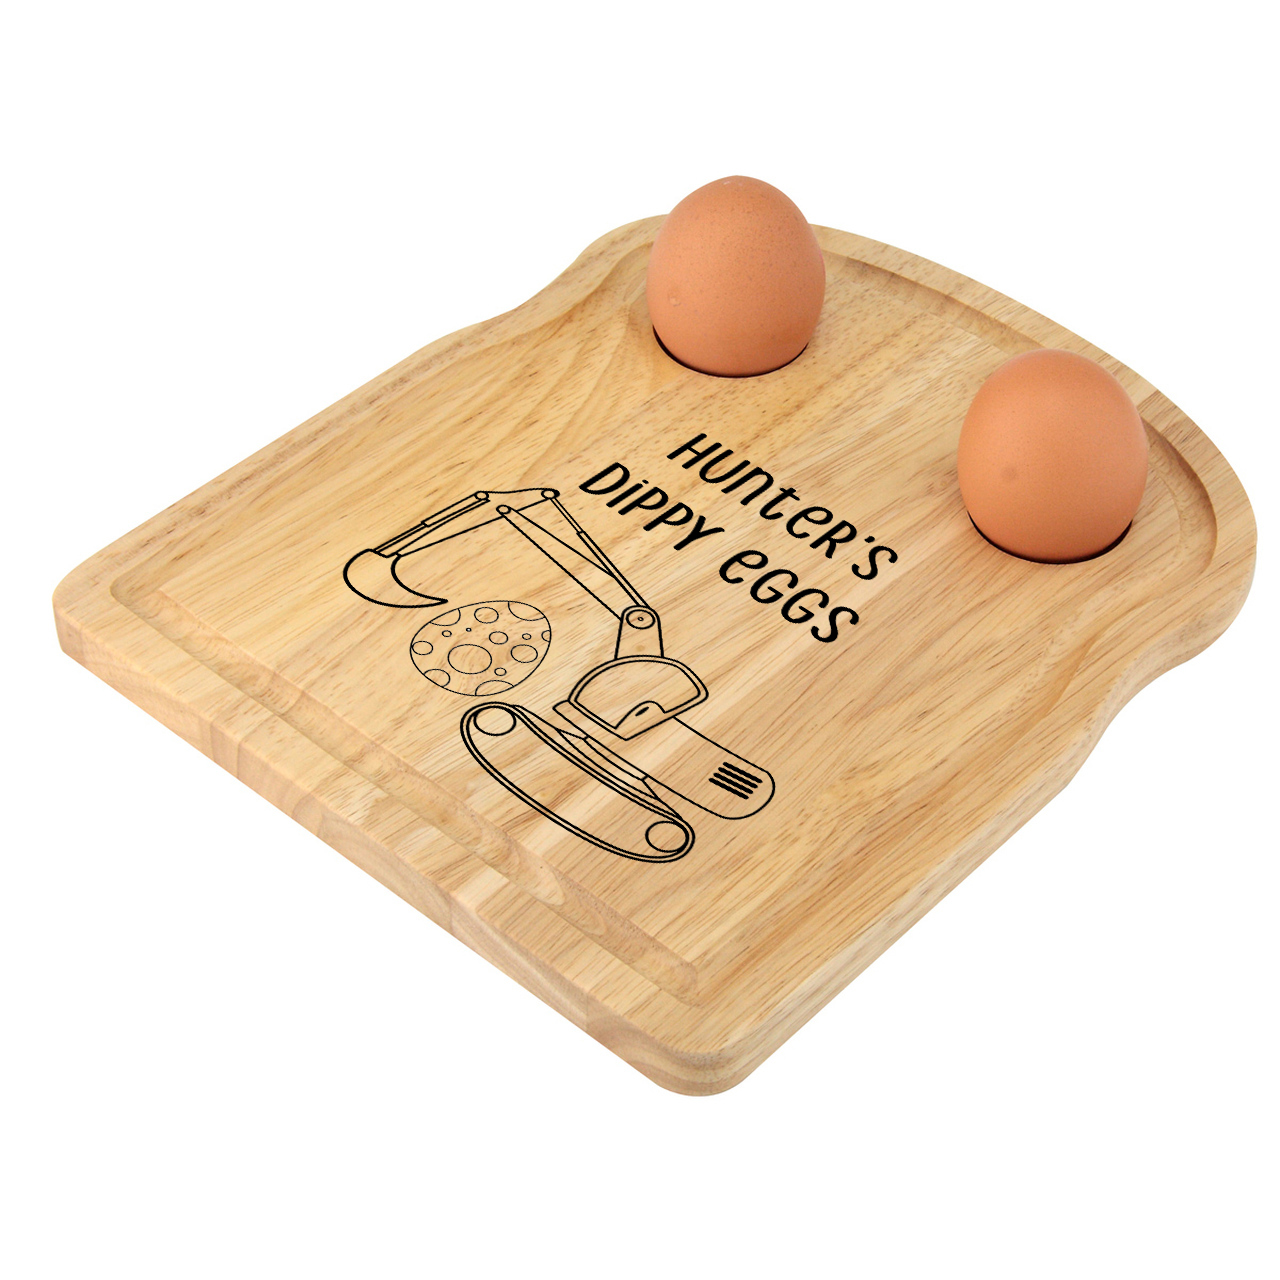 Wooden Loaf Egg Board with digger personalised